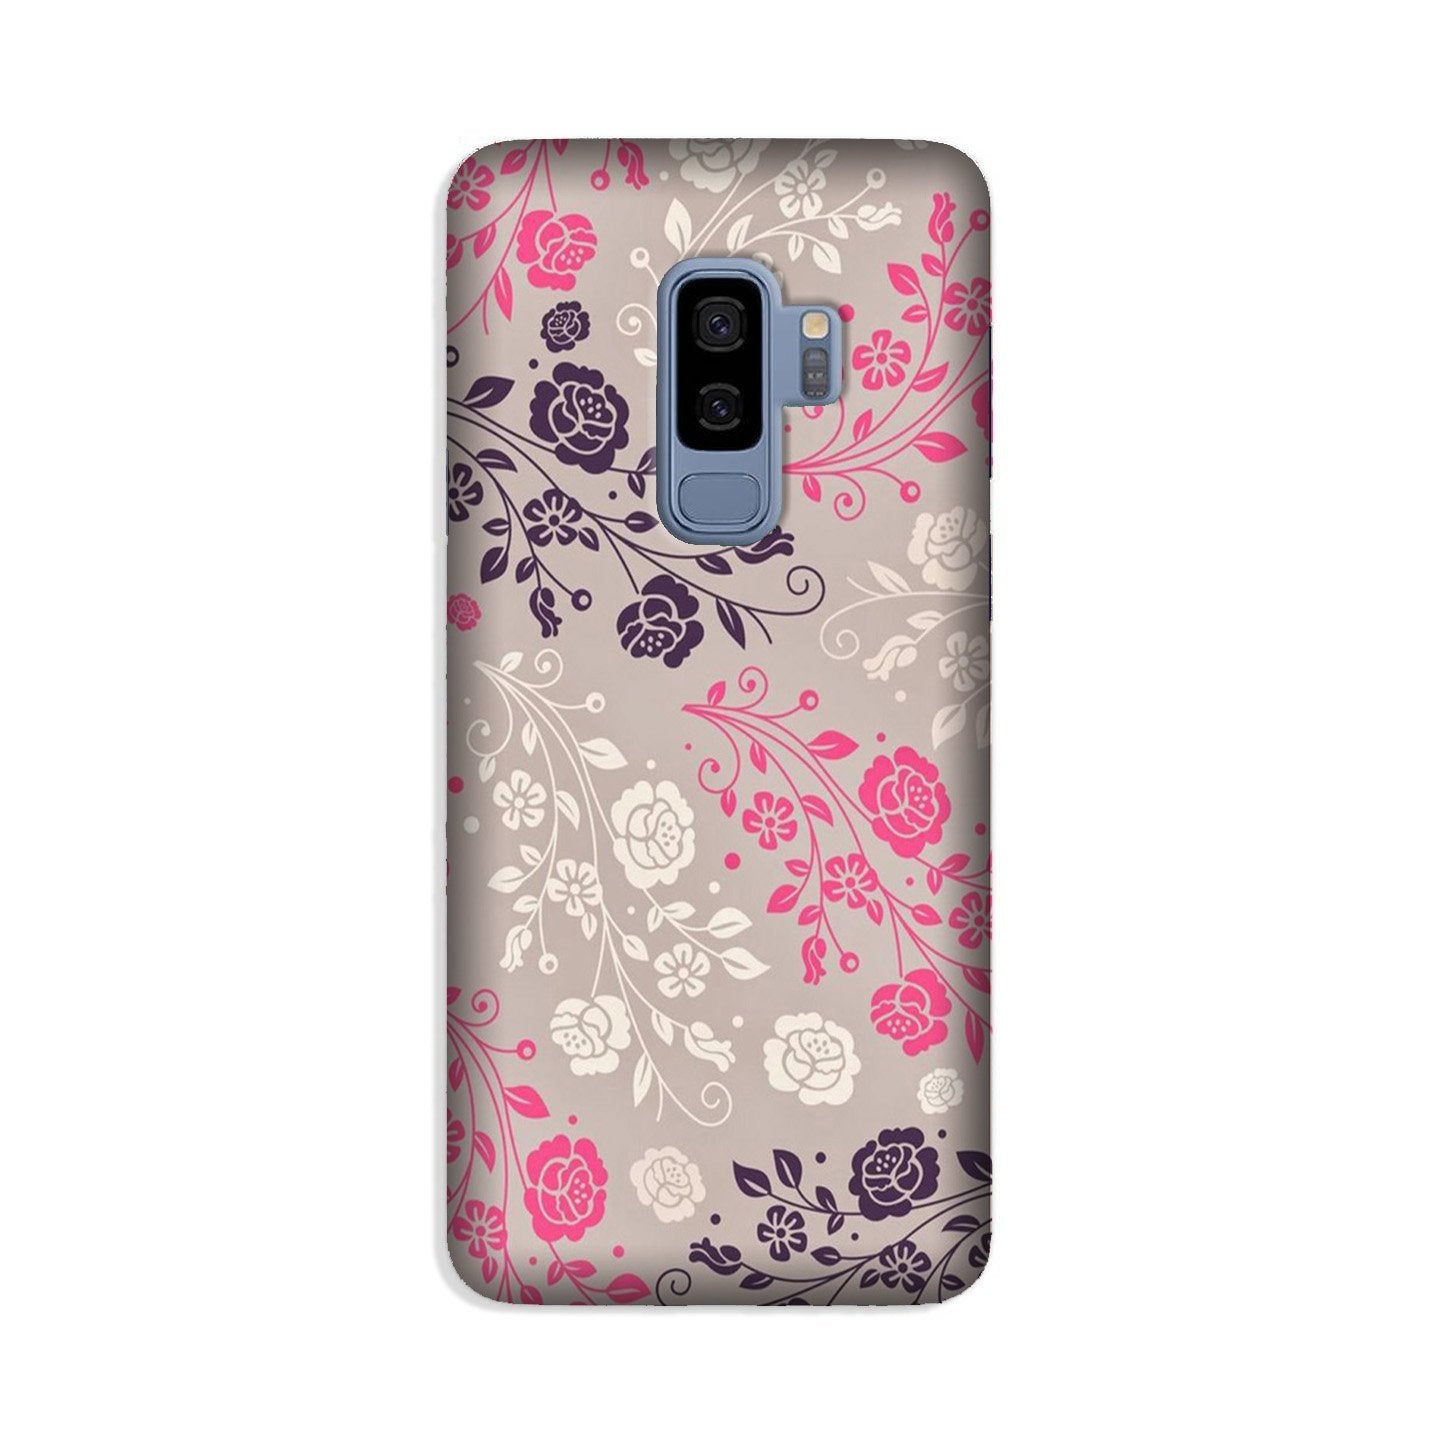 Pattern2 Case for Galaxy S9 Plus